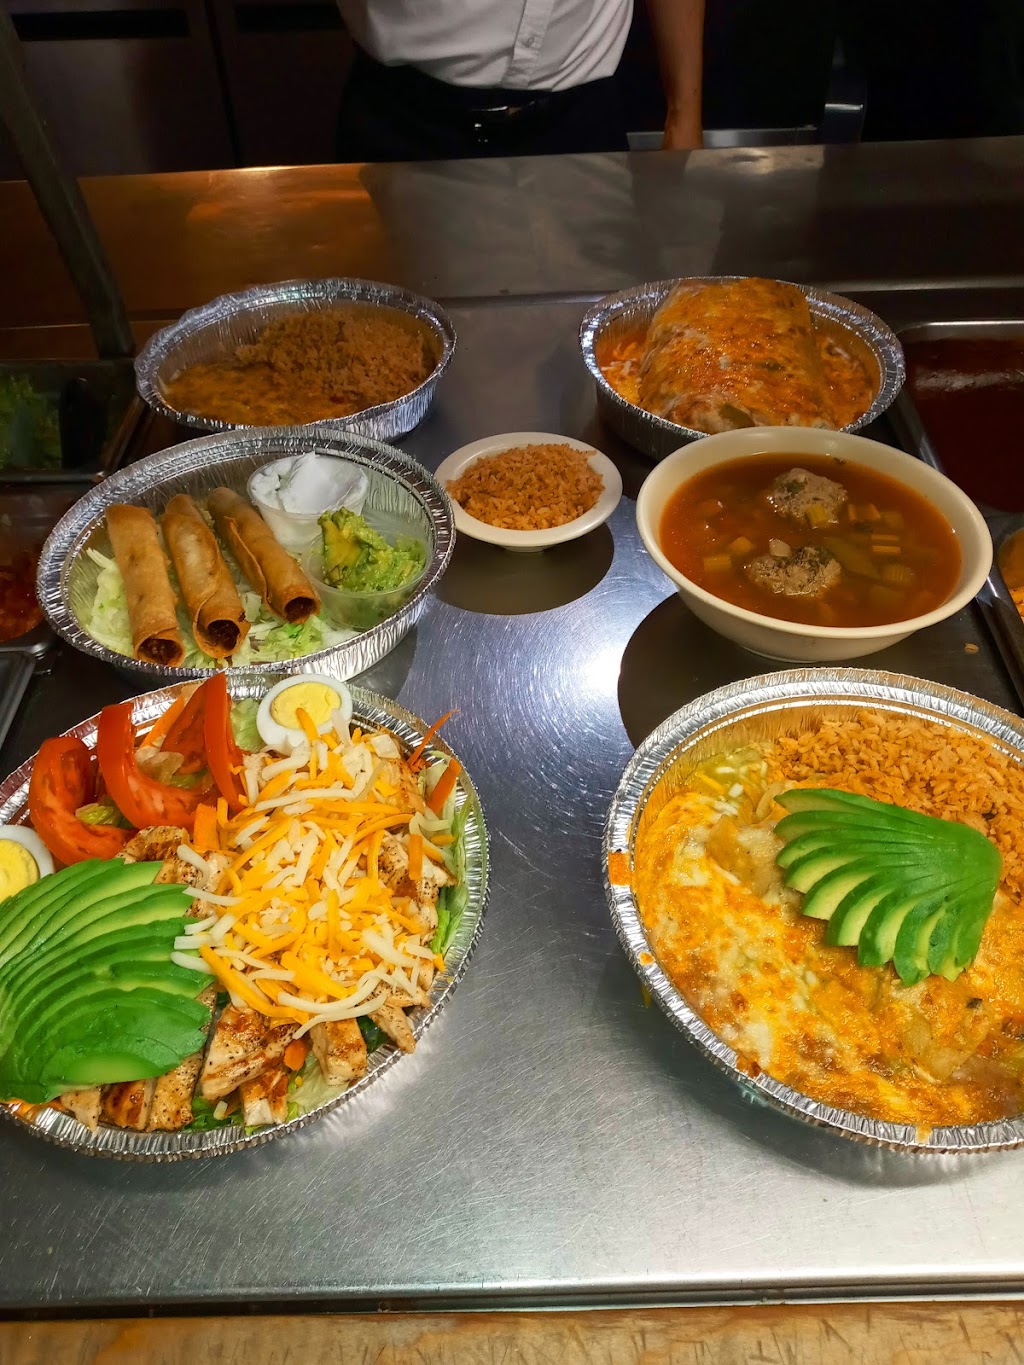 Amor Indio Mexican Restaurant | 15200 Valley Blvd, City of Industry, CA 91746, USA | Phone: (626) 330-8119